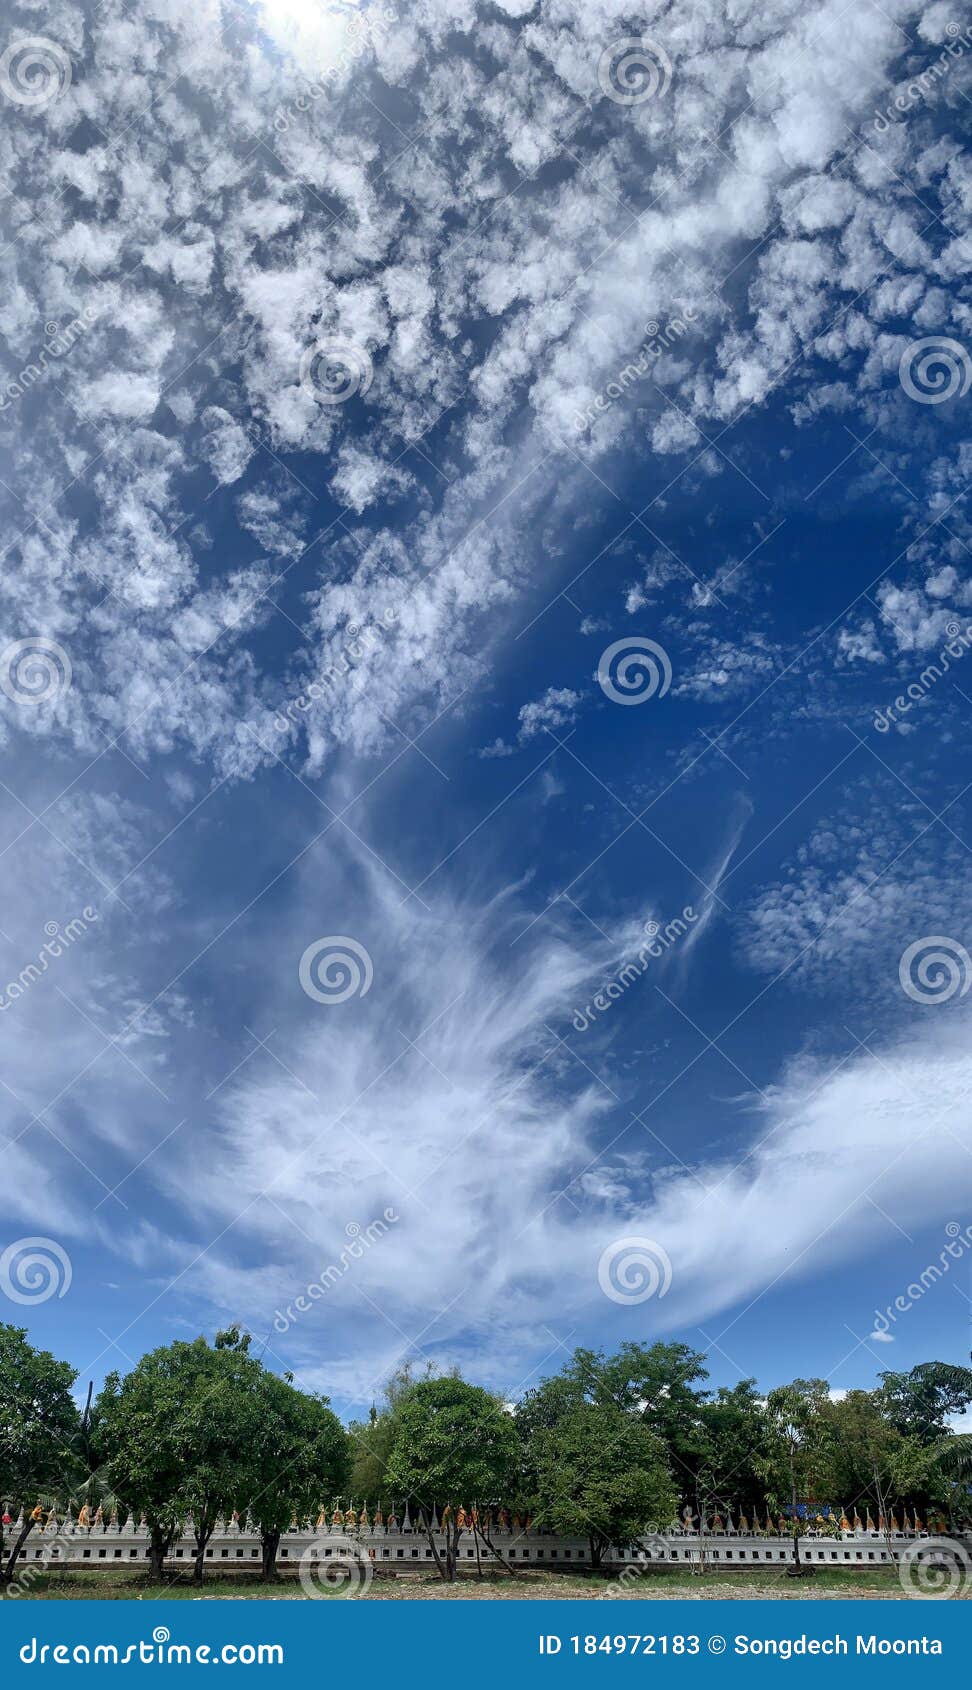 Bright Clouds and Blue Skies 9:16 Vertical Wallpaper Stock Image - Image of  blue, clouds: 184972183